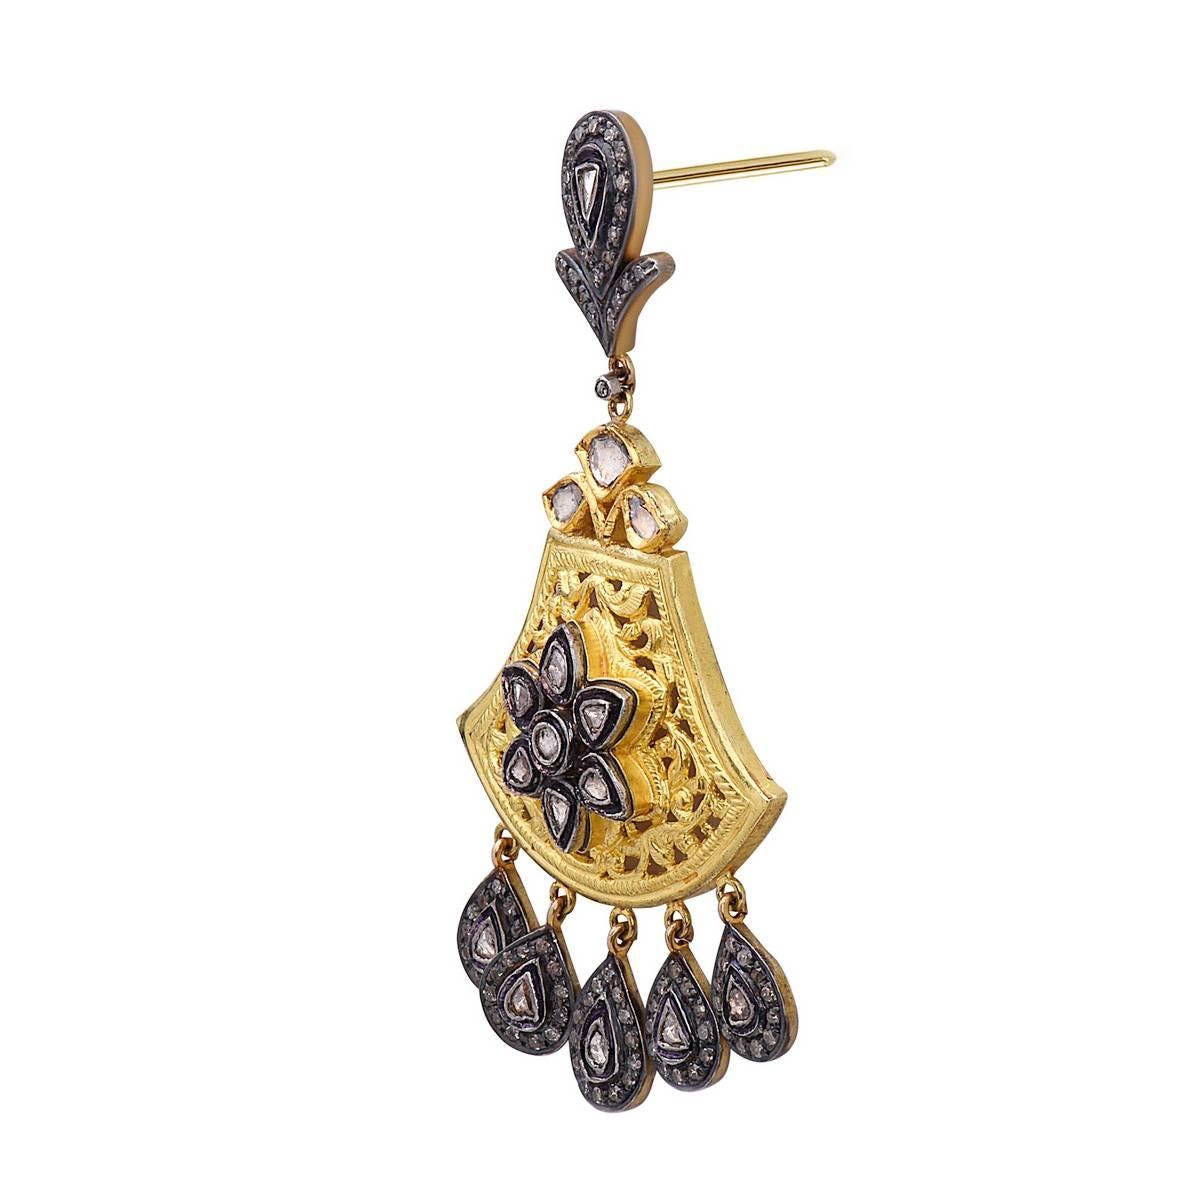 Victorian Rose Cut Diamond Dangle Earrings With Filigree Work Made In 14k Gold & Silver For Sale